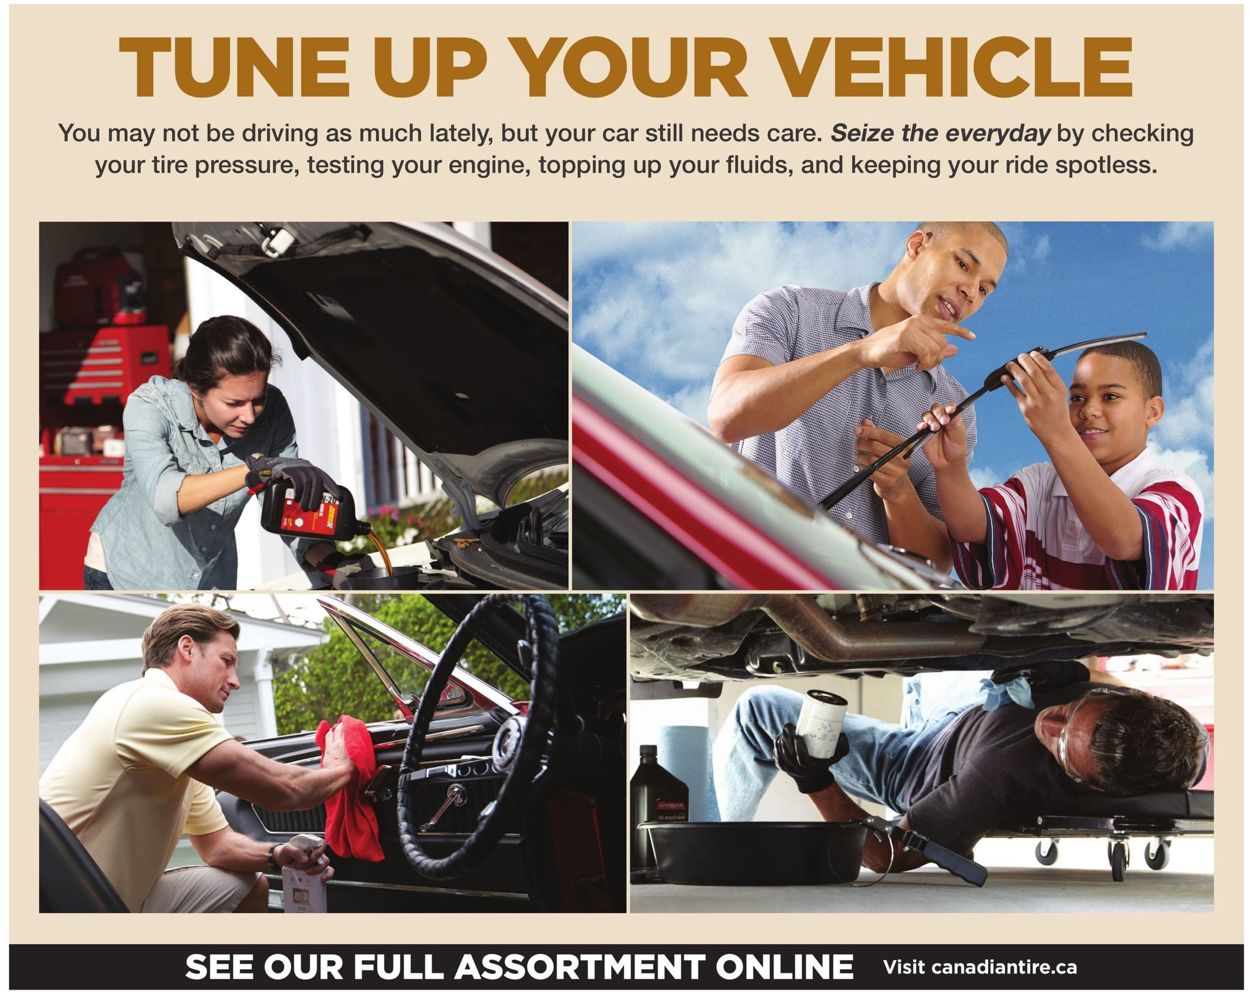 Canadian Tire Flyer from 09/17/2020